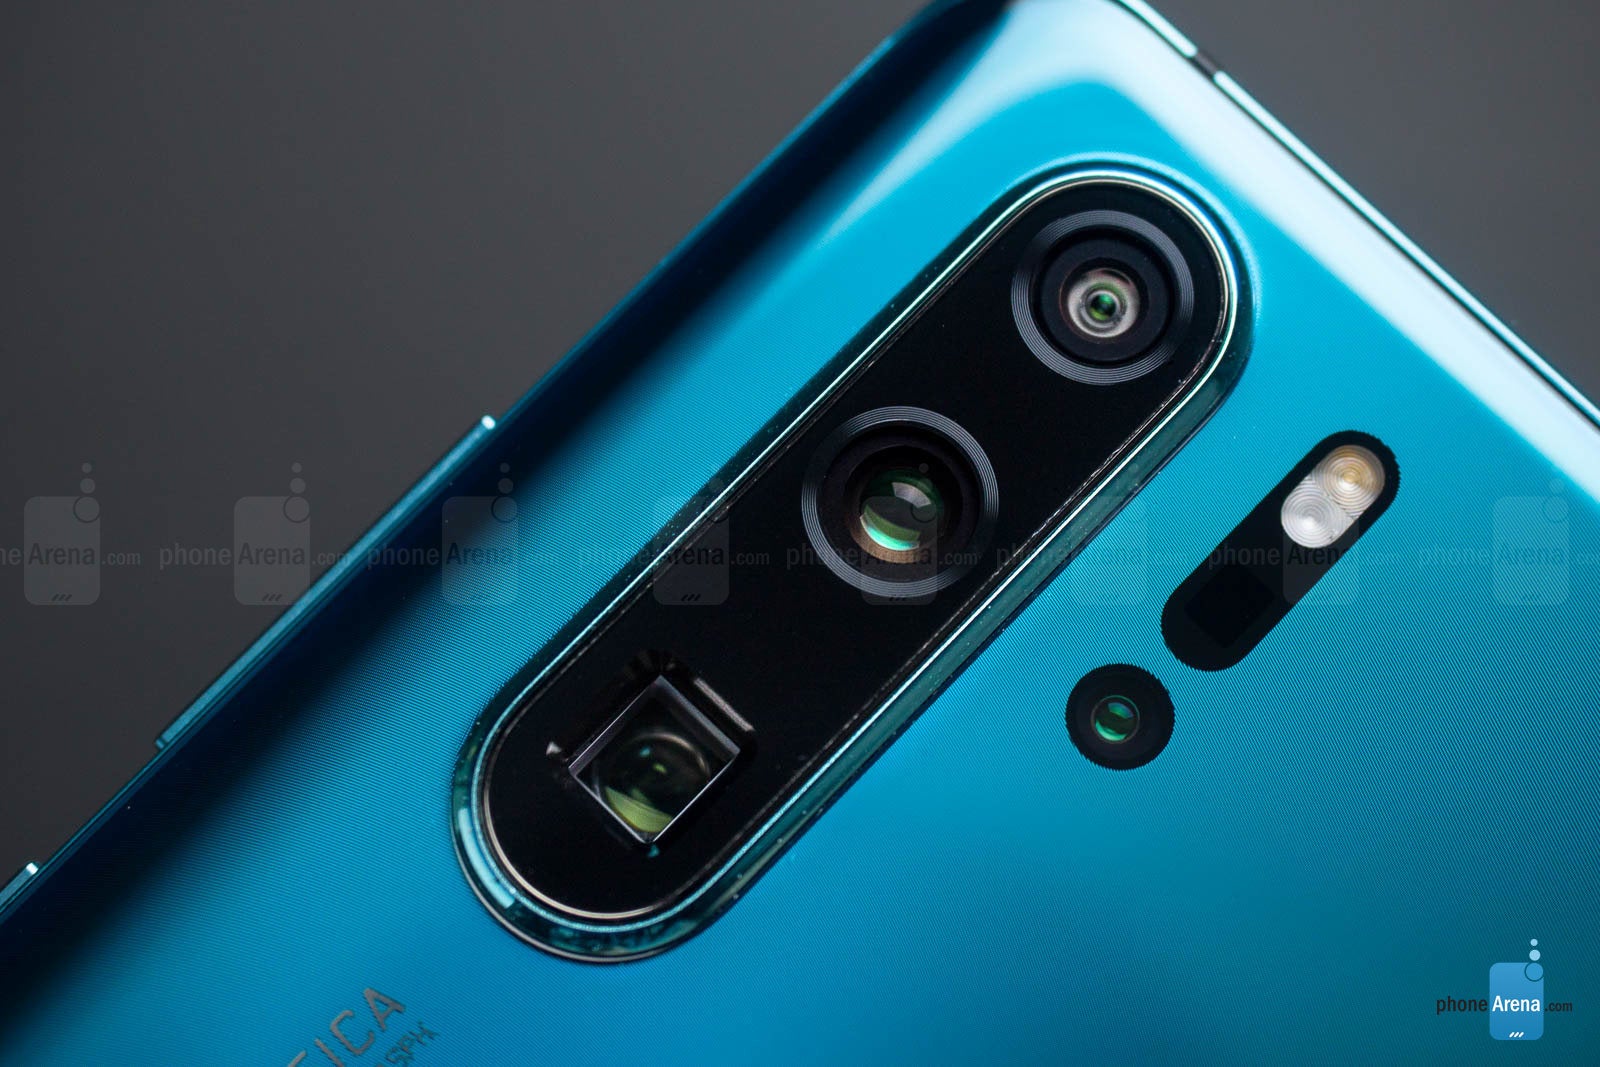 Huawei's P30 Pro has four cameras on its back - Samsung and Huawei significantly outspend Apple on camera components